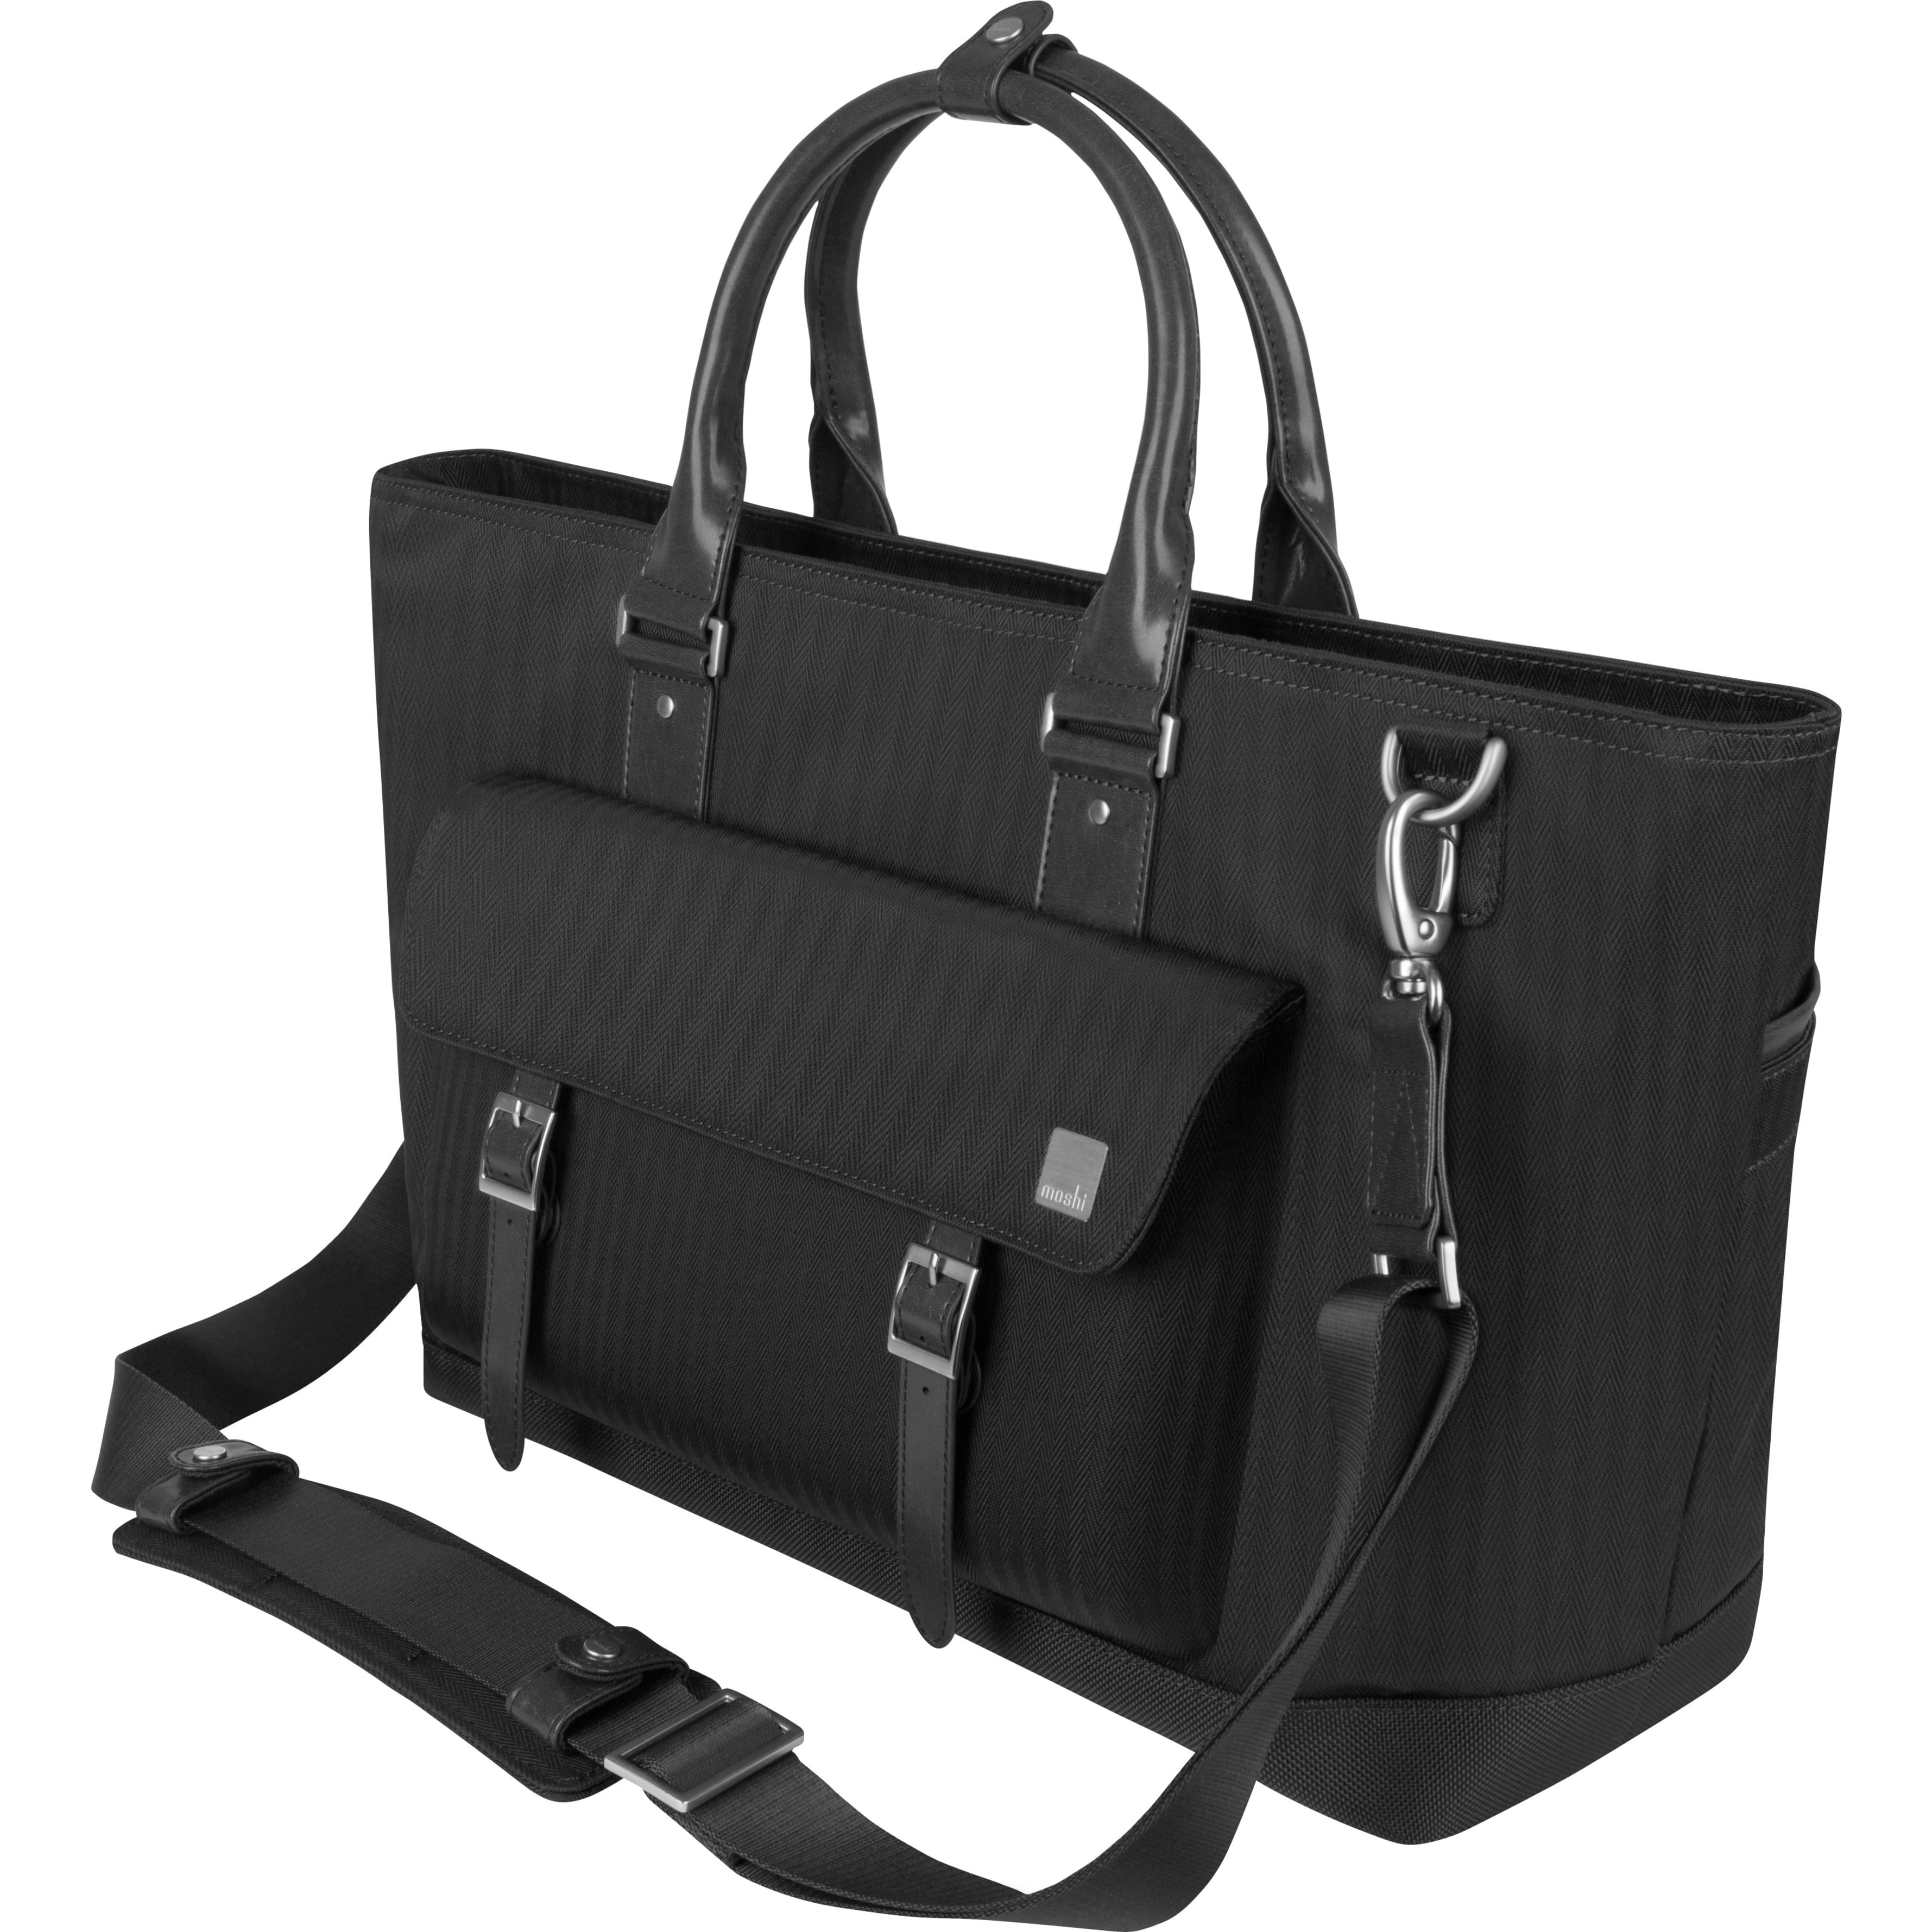 Black NNEE Classic Laptop Leather Tote Bag for 15 15.6 inch Notebook Computers Travel Carrying Bag with Smart Trolley Strap Design